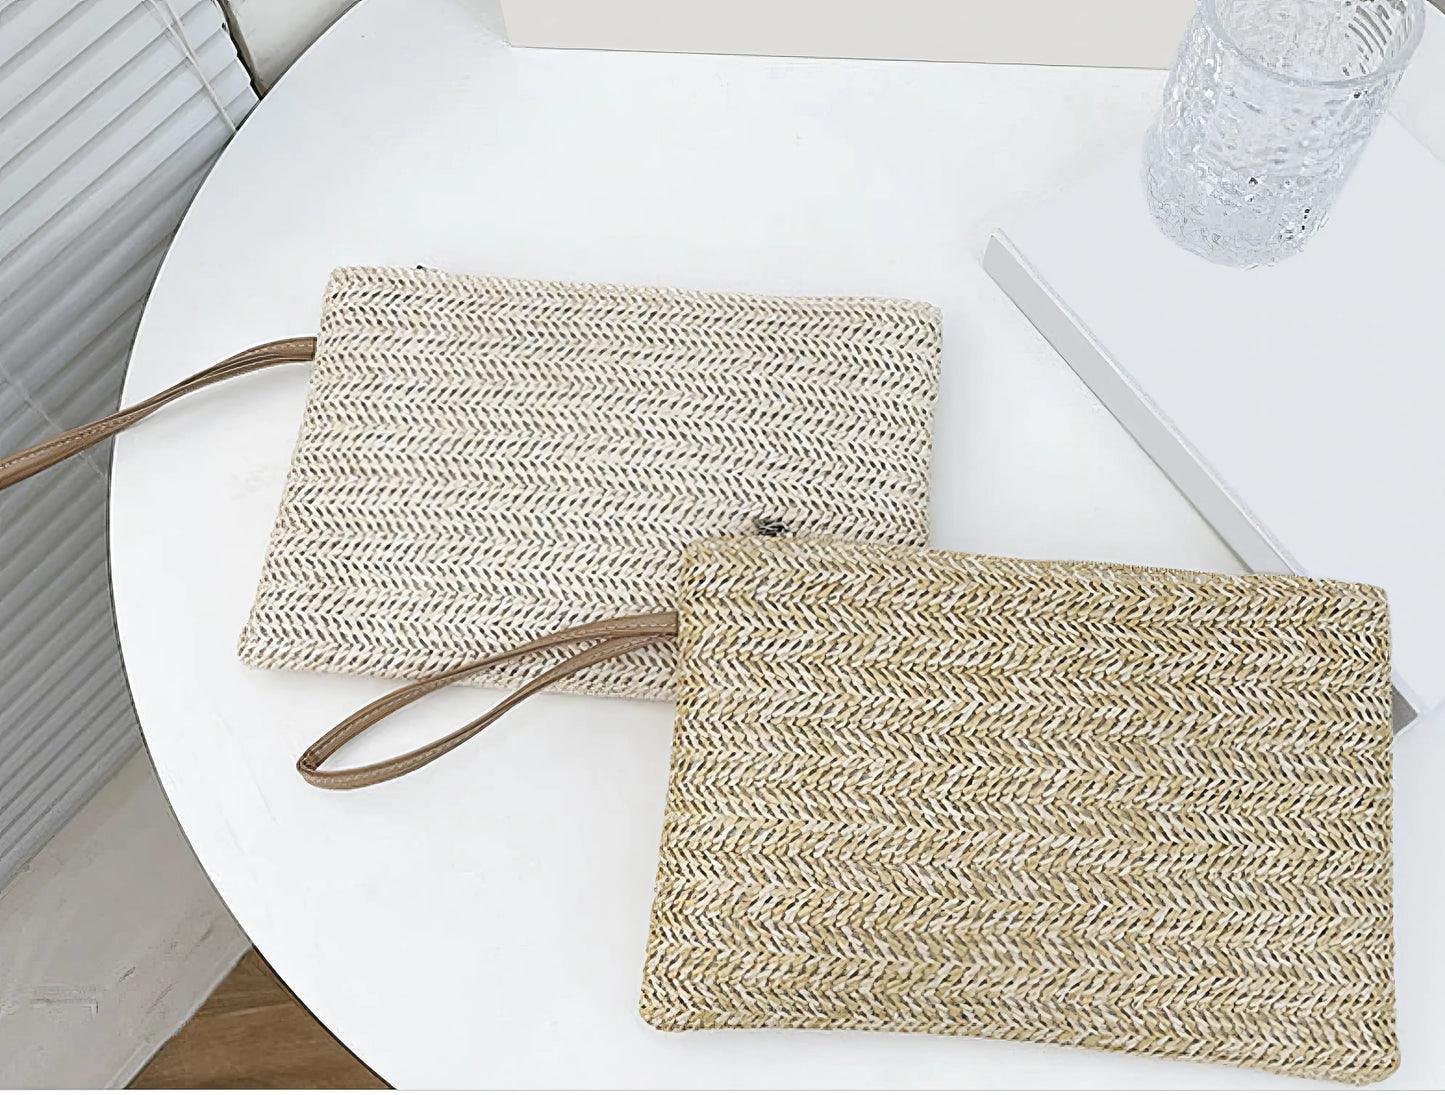 Woven Straw Clutch Wristlet Bag with Leather Handle in Brown Sugar